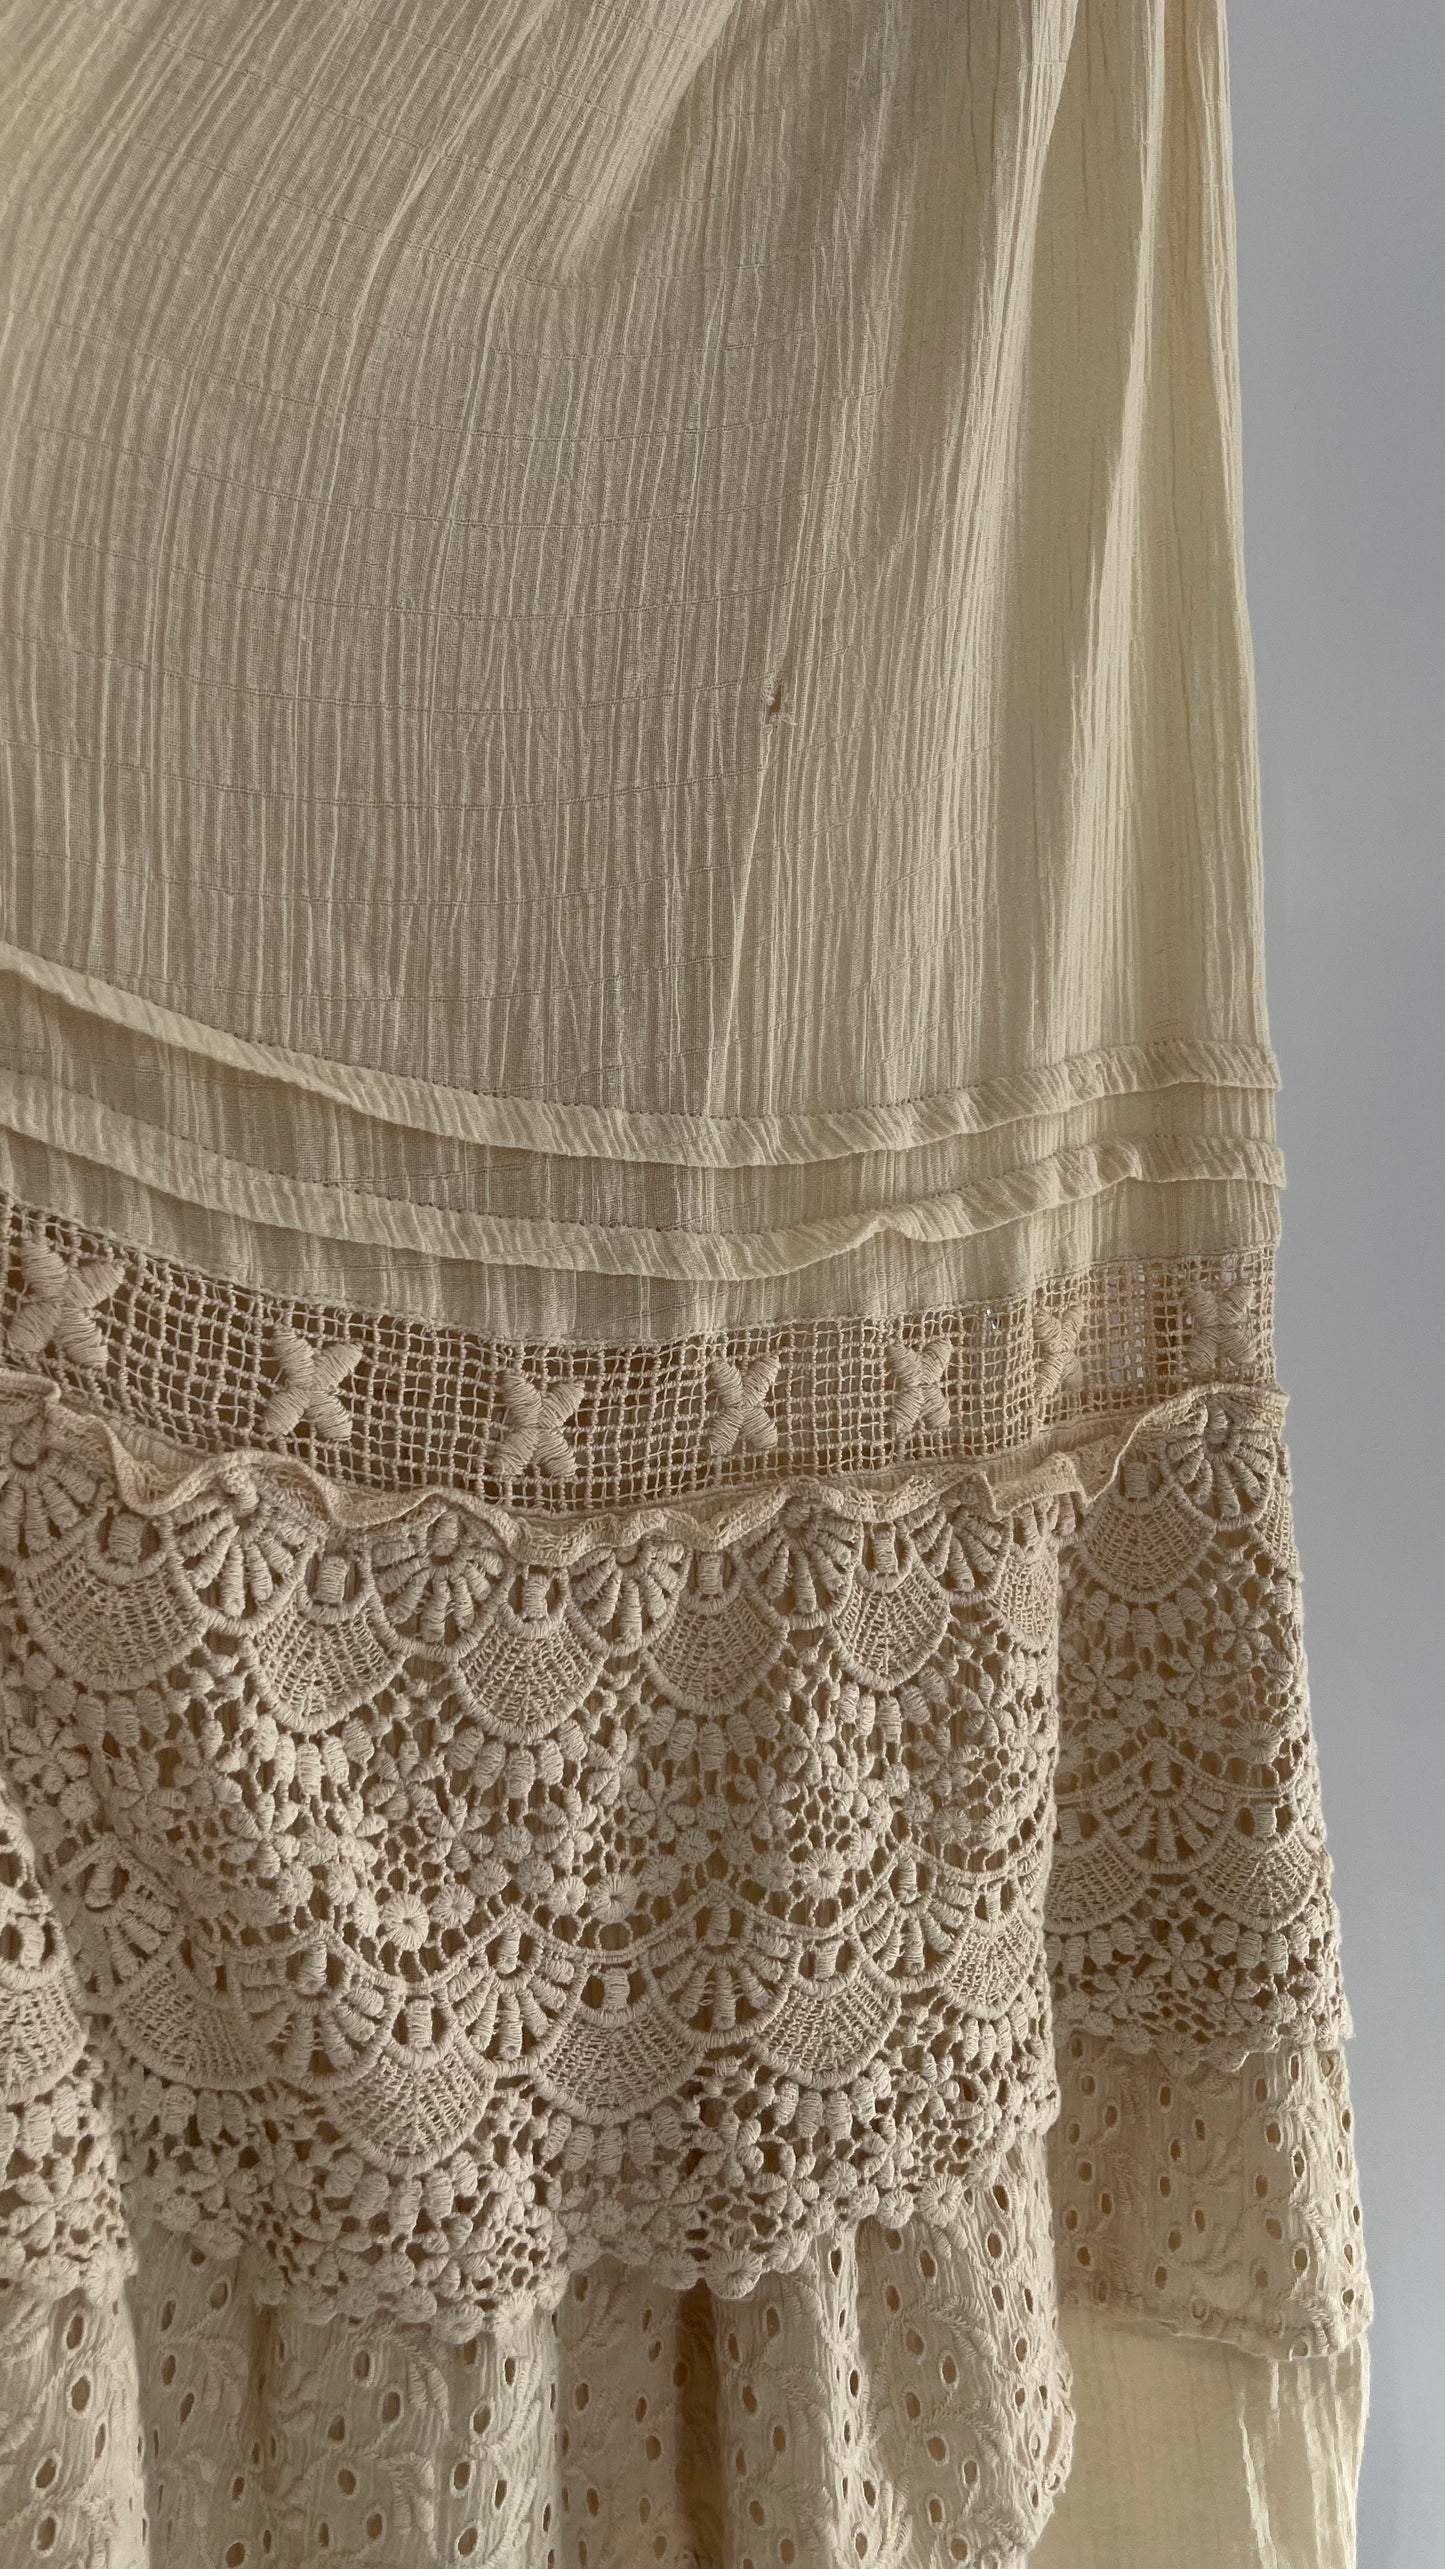 Free People Beige Gauze/Cotton Full Length Skirt Lined with Lace  (XS)